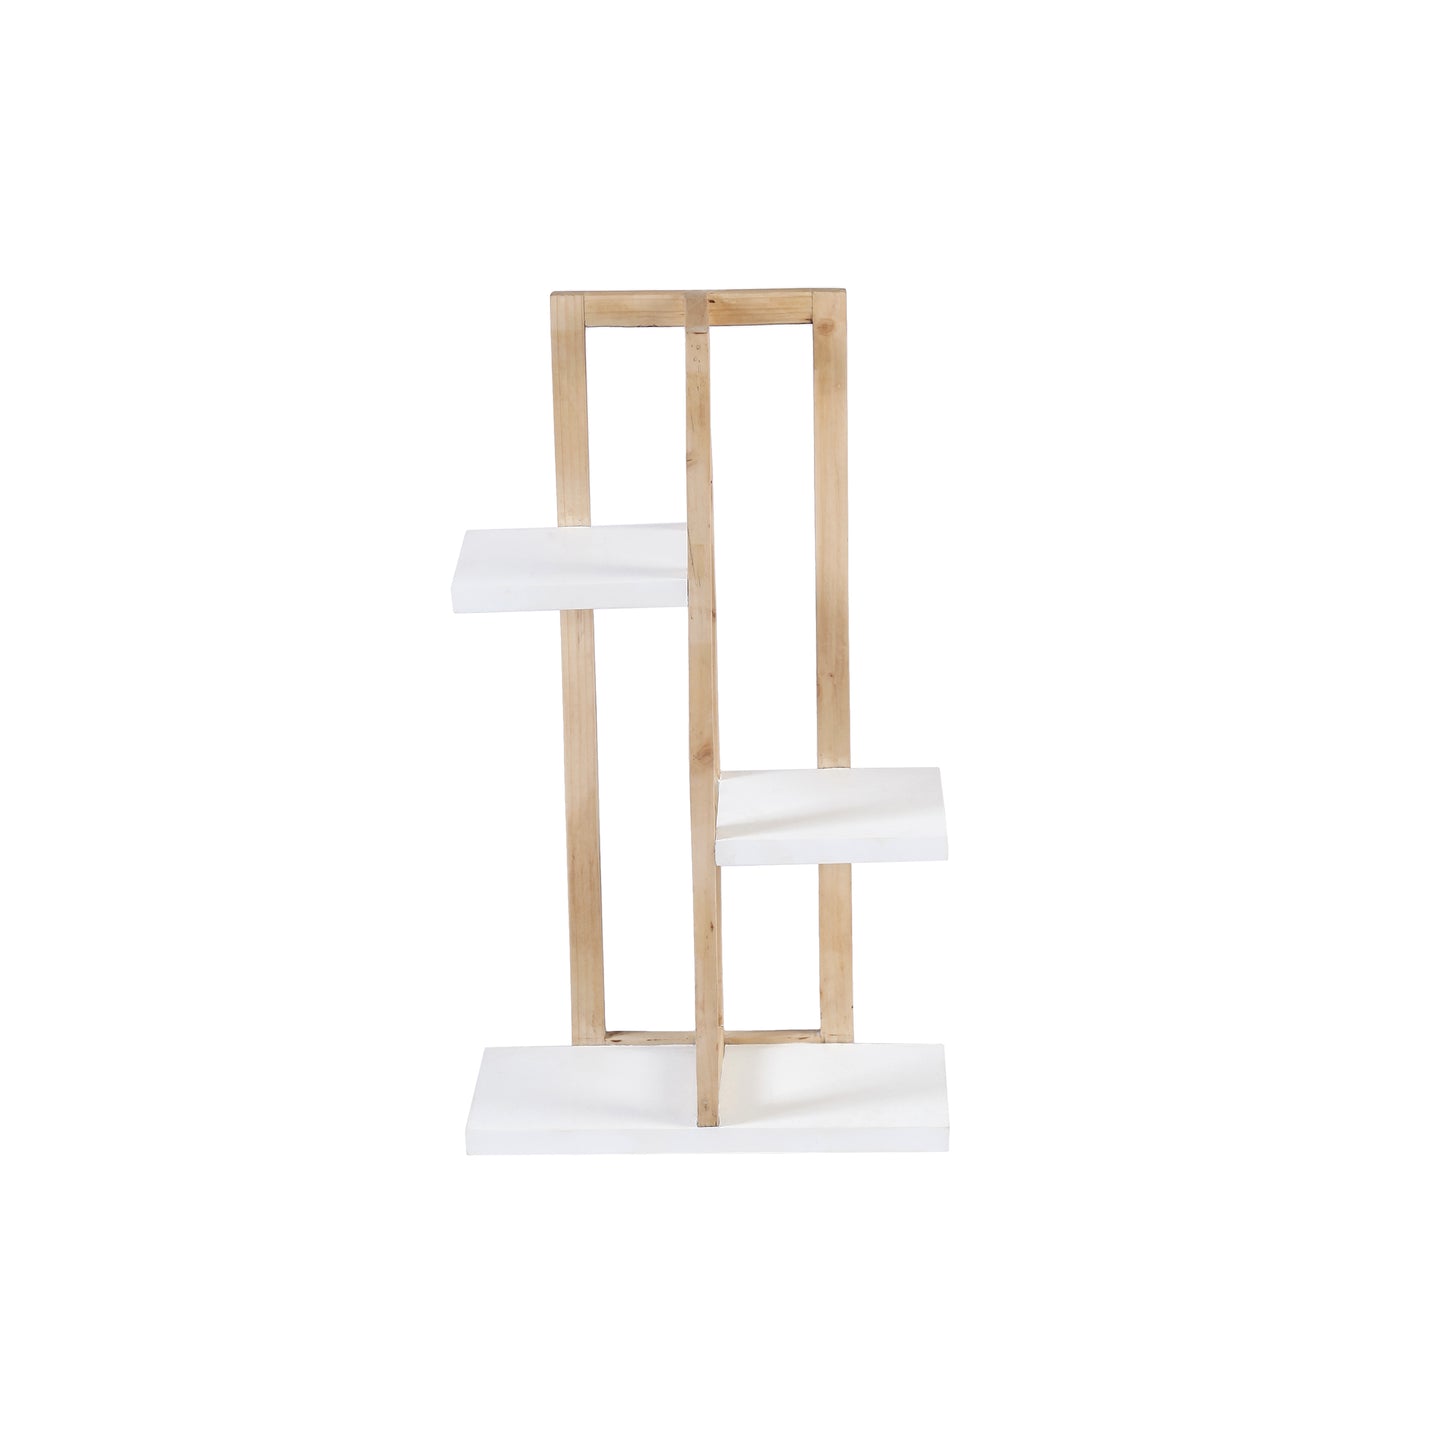 A Tiny Mistake All Purpose Three Tier Stand (One Piece) (For Planters, Ornaments and Accessories) (Natural Pine Wood Stand with White Planks)